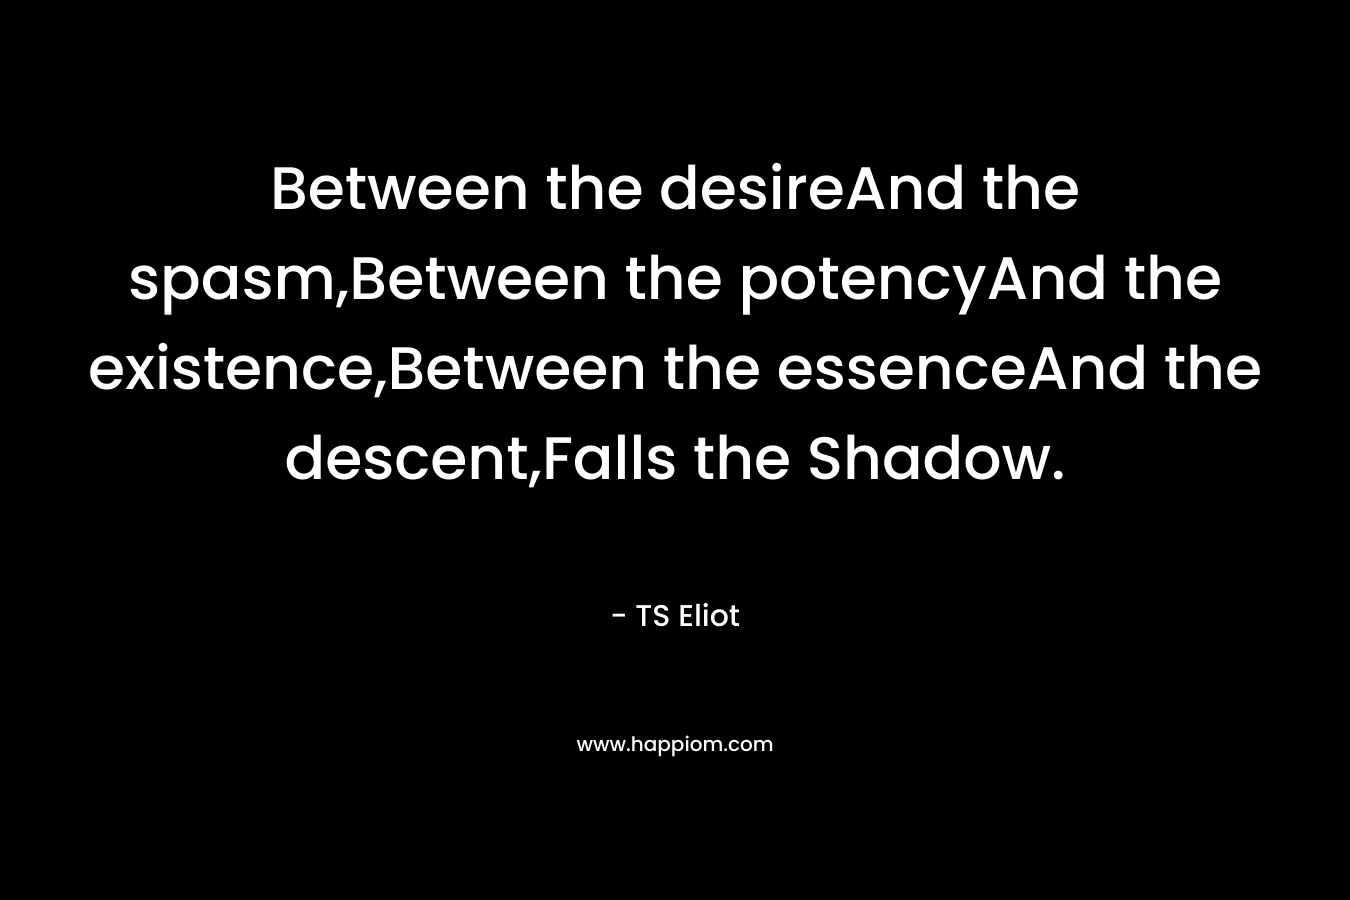 Between the desireAnd the spasm,Between the potencyAnd the existence,Between the essenceAnd the descent,Falls the Shadow.